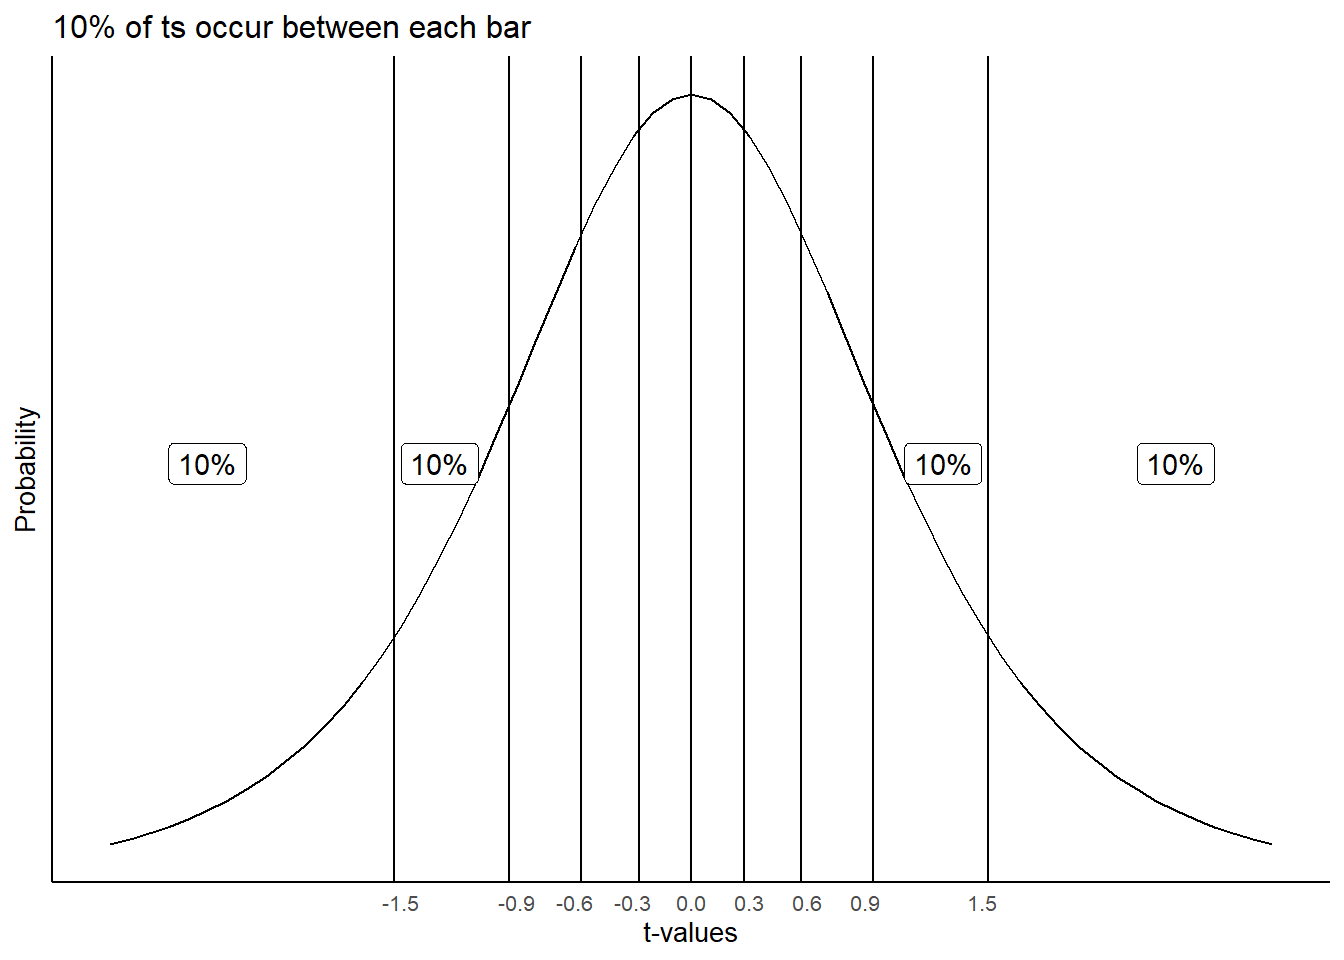 Splitting the t distribution up into regions each containing 5% of the t-values. The width between the bars narrows as they approach the center of the distribution, where there are more t-values